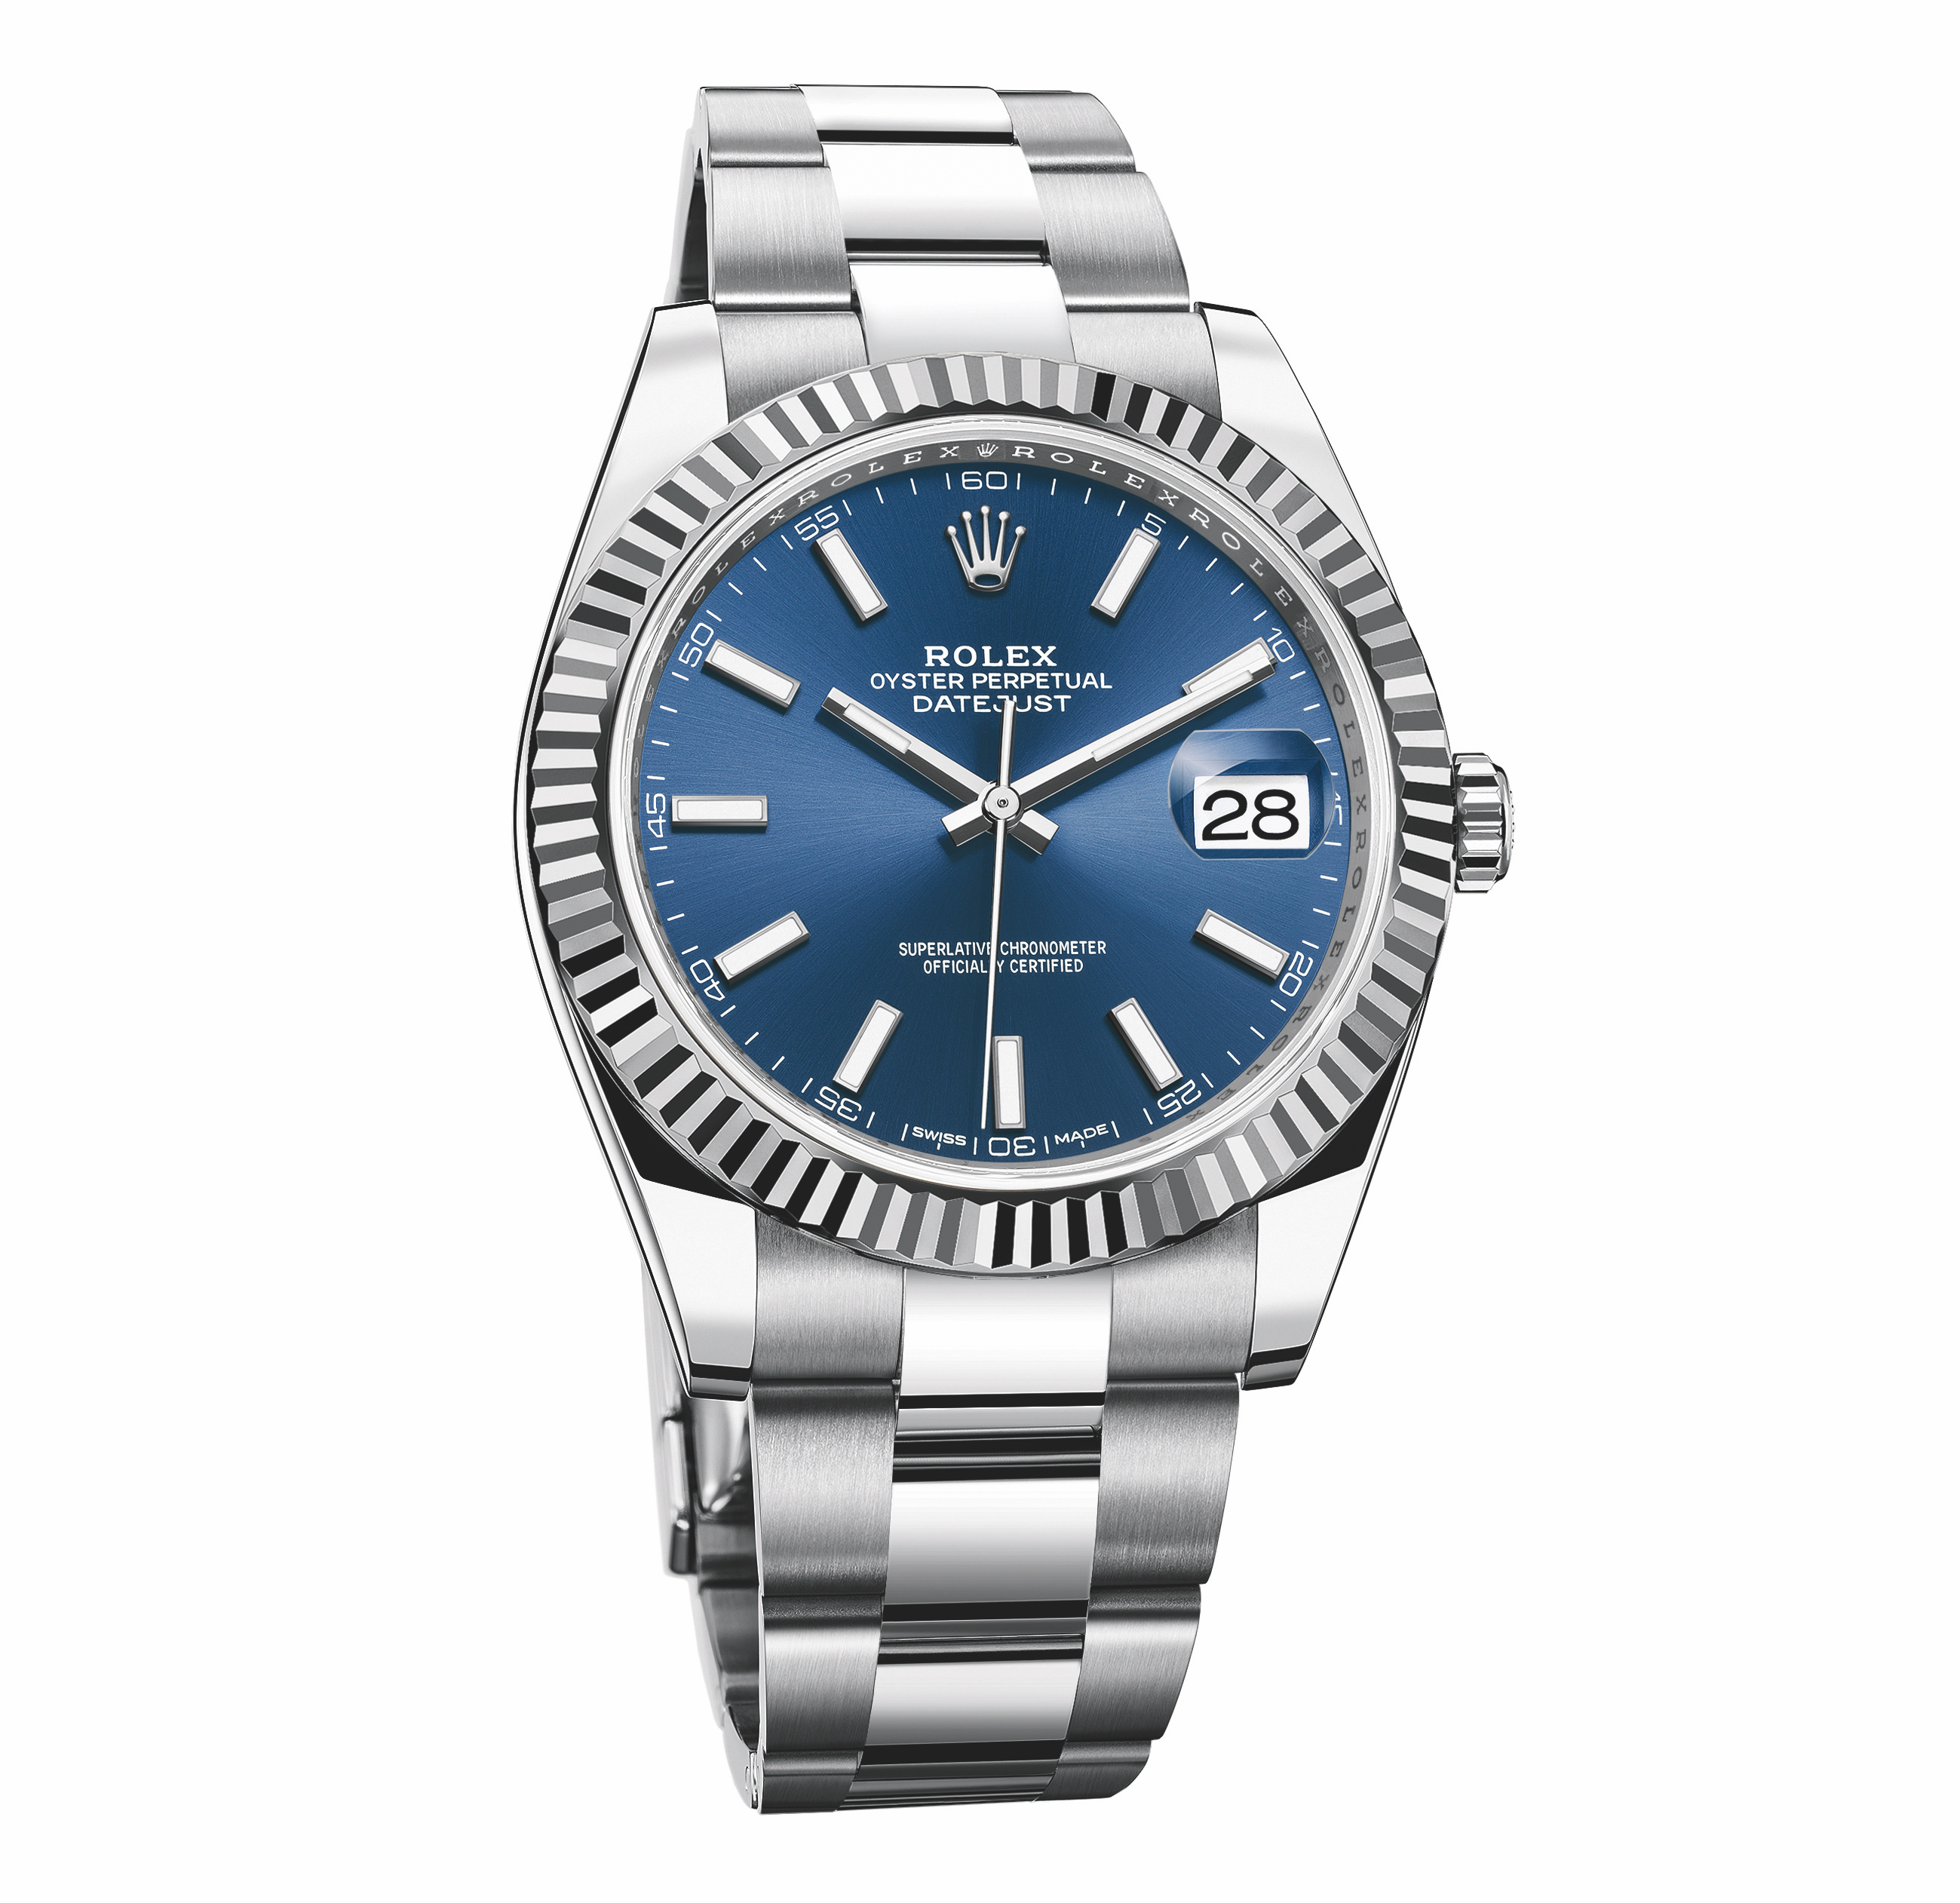 Introducing: The Rolex Datejust 41, Now 